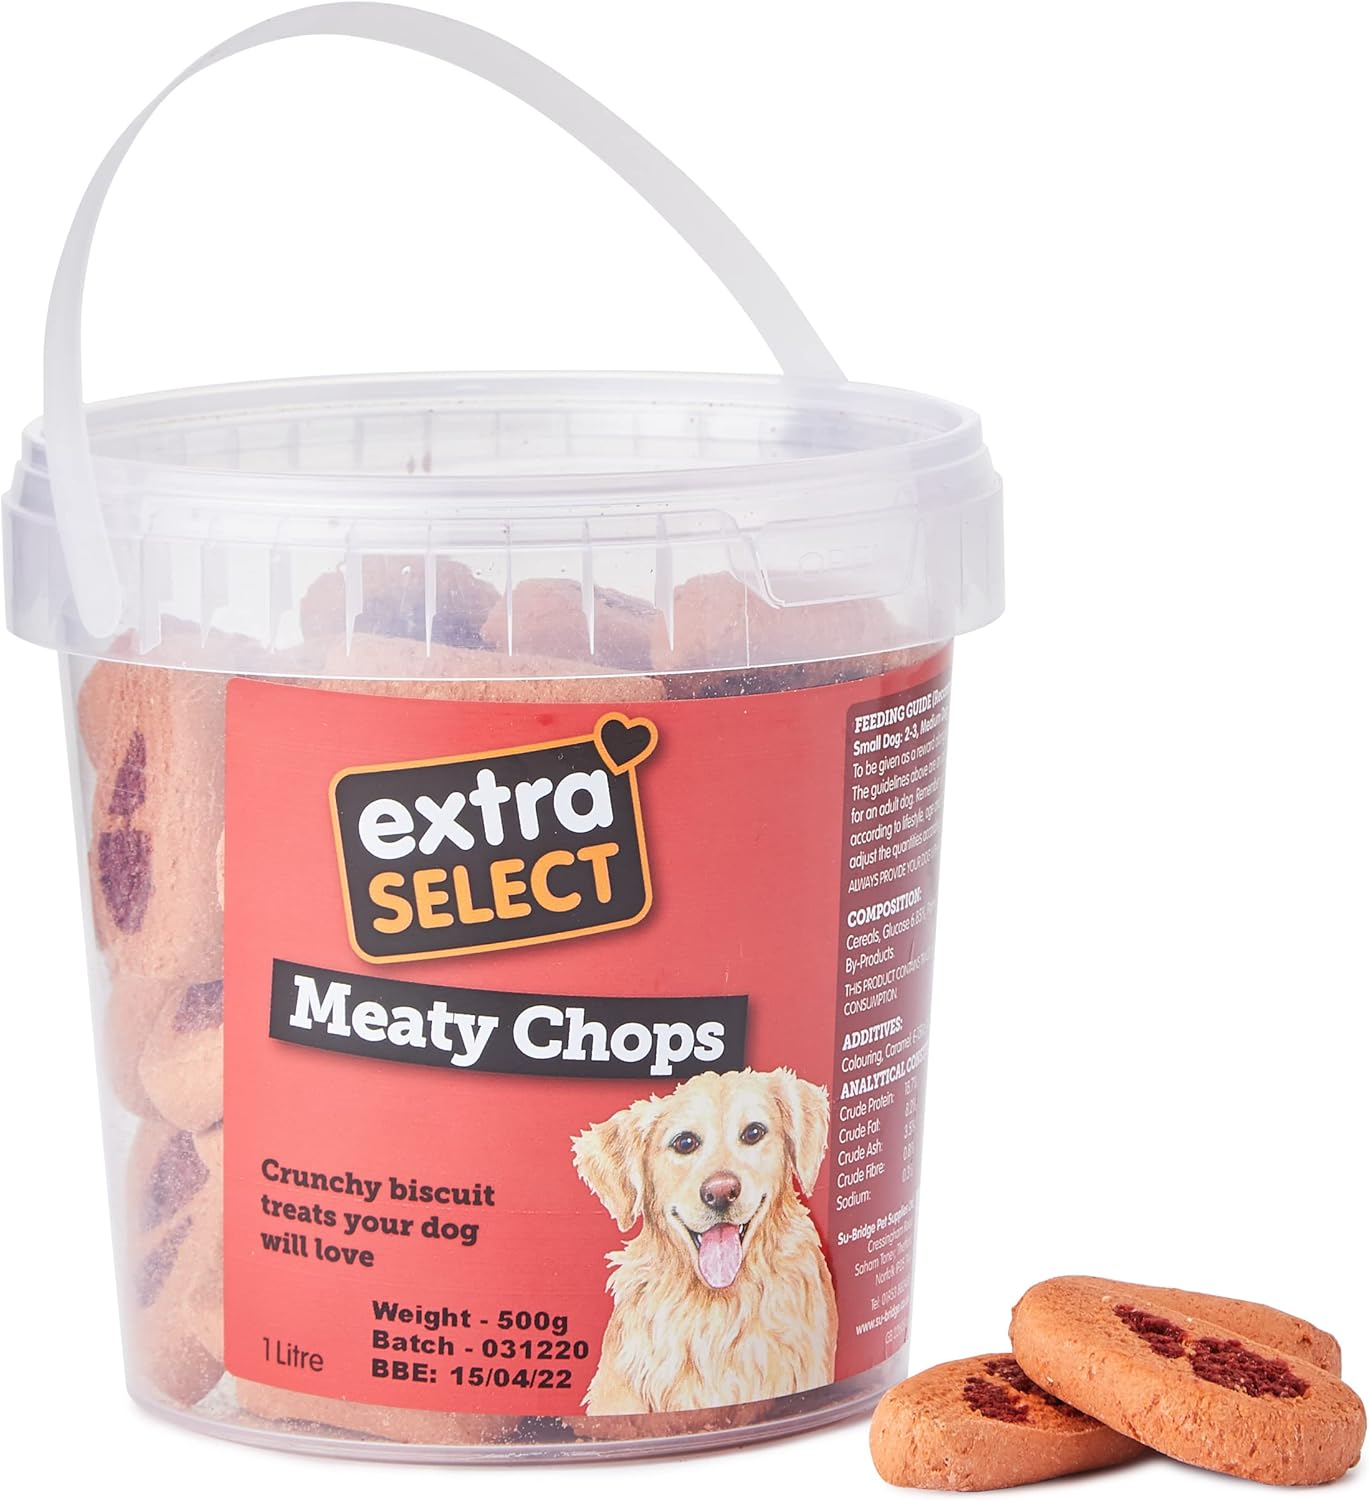 Extra Select Chop Shaped Dog Treat Biscuits in a 1ltr Bucket (approx 70 biscuits)?01SBT1